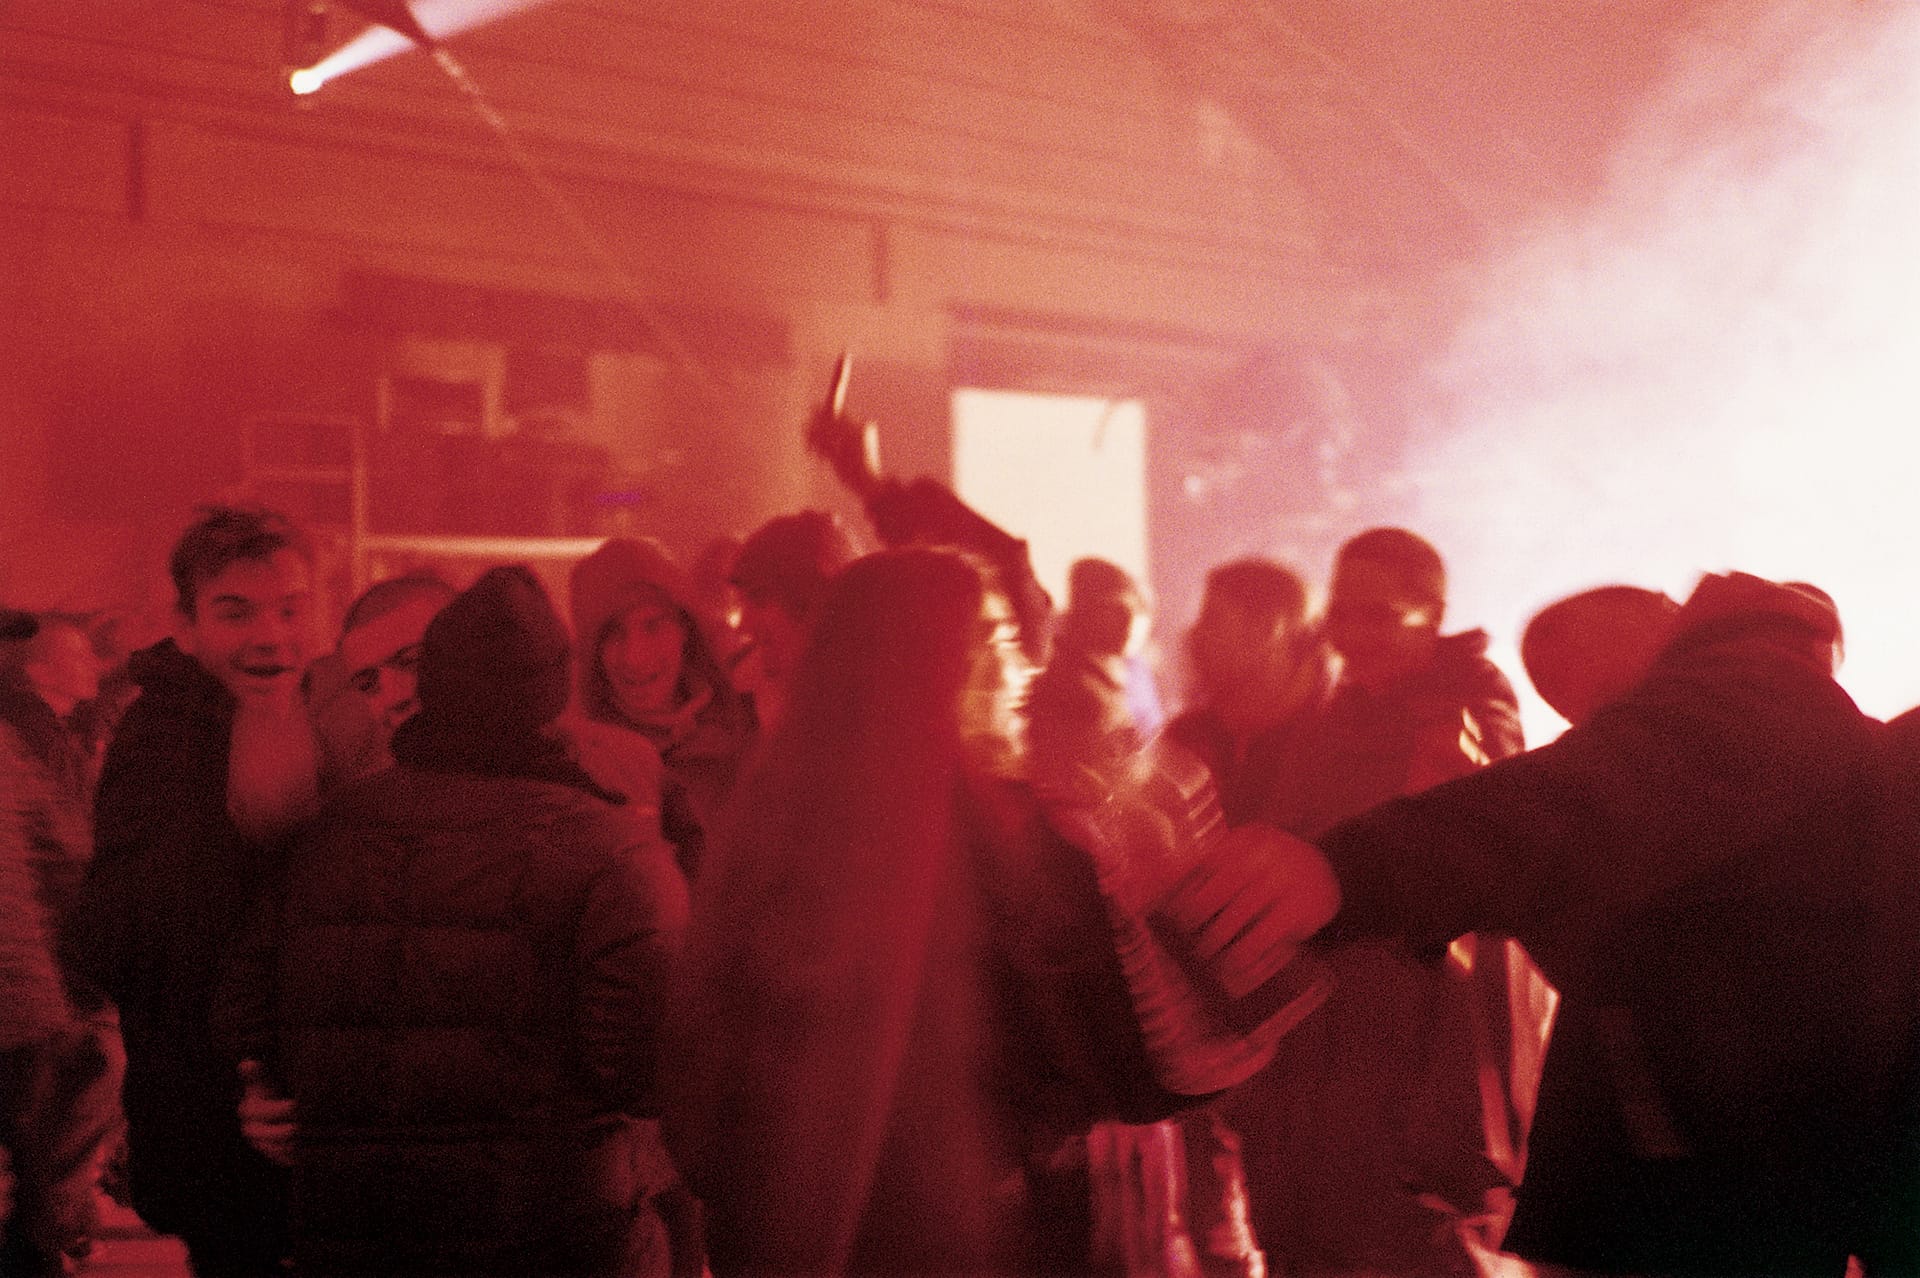 Finding Euphoria and Community in Rave Culture